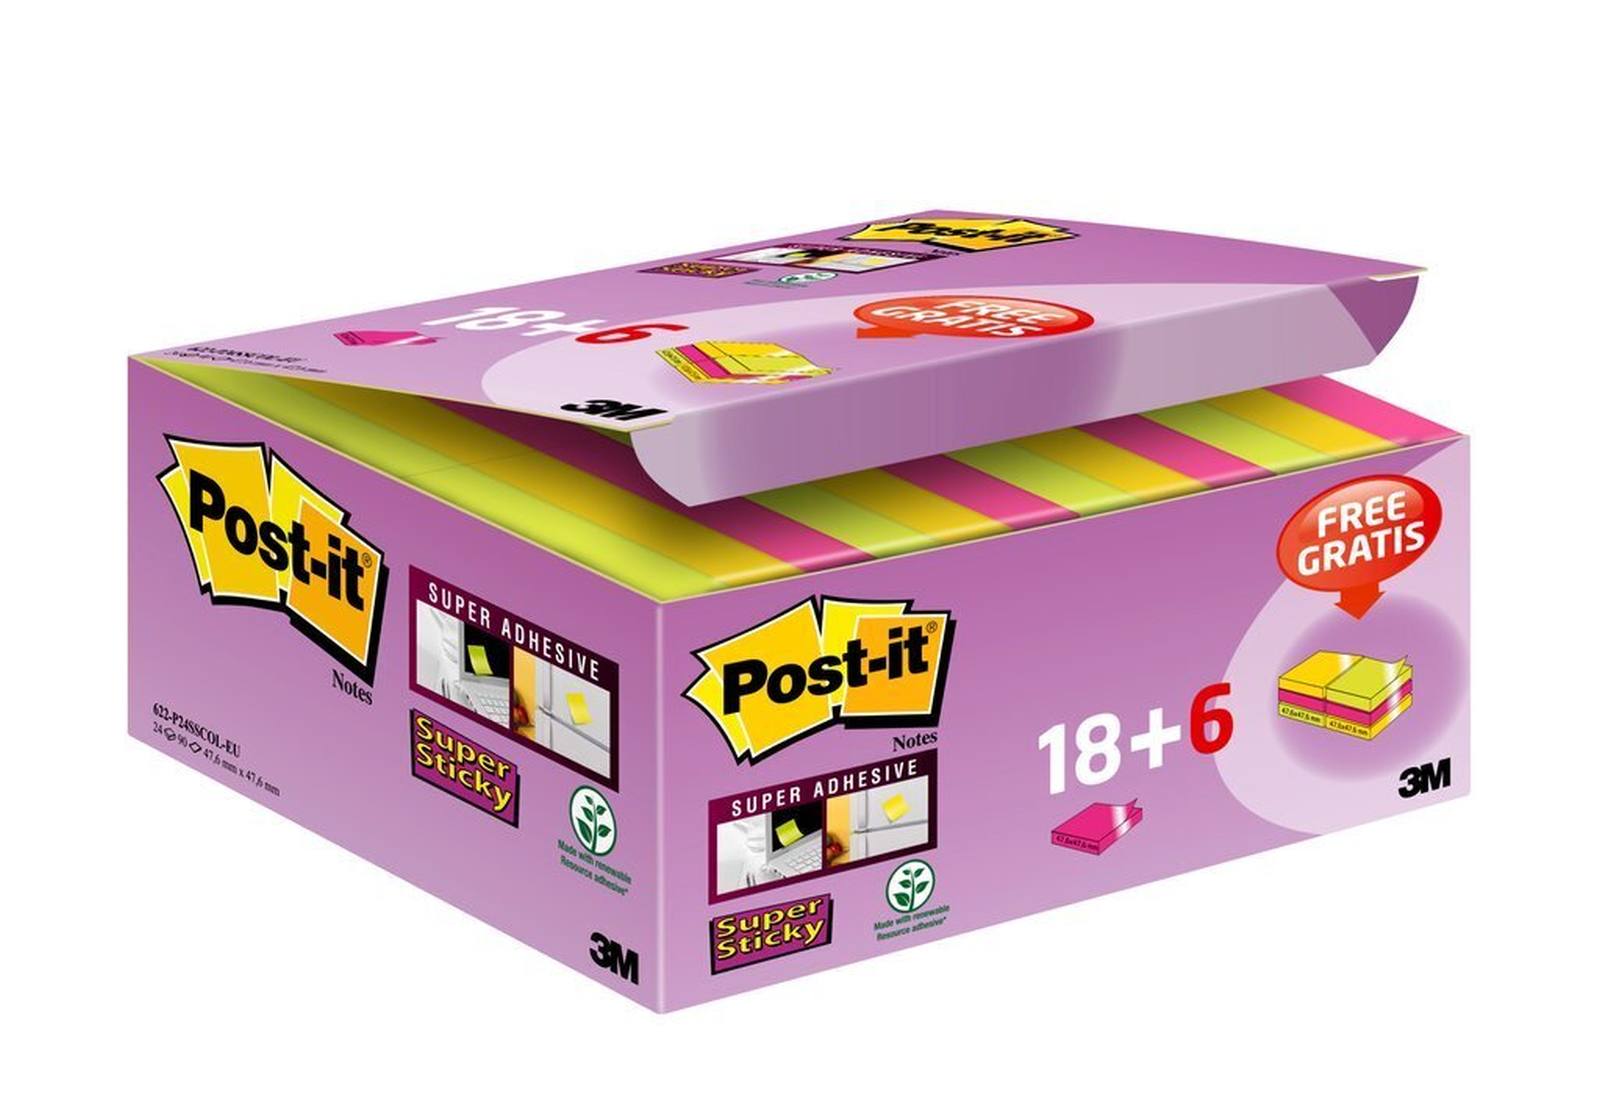 3M Post-it Super Sticky Notes Promotion 622P24SC, 24 pads of 90 sheets in a box at a special price, ultra pink, yellow, neon green, 48 mm x 48 mm, not individually cellophaned, PEFC certified